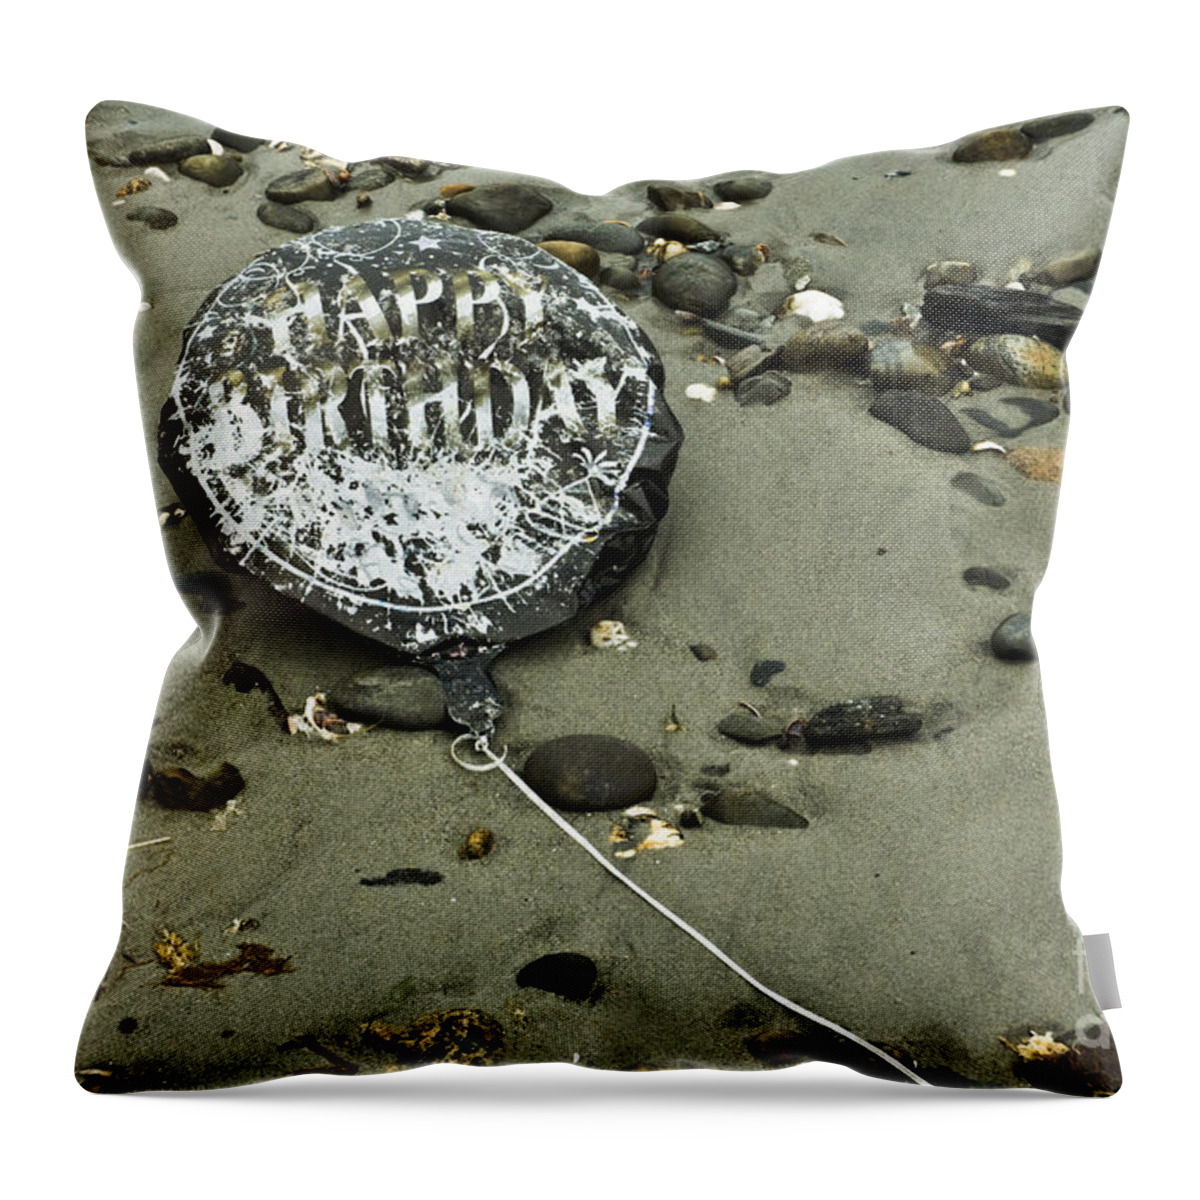 Birthday Throw Pillow featuring the photograph Happy Belated Birthday by David Gordon